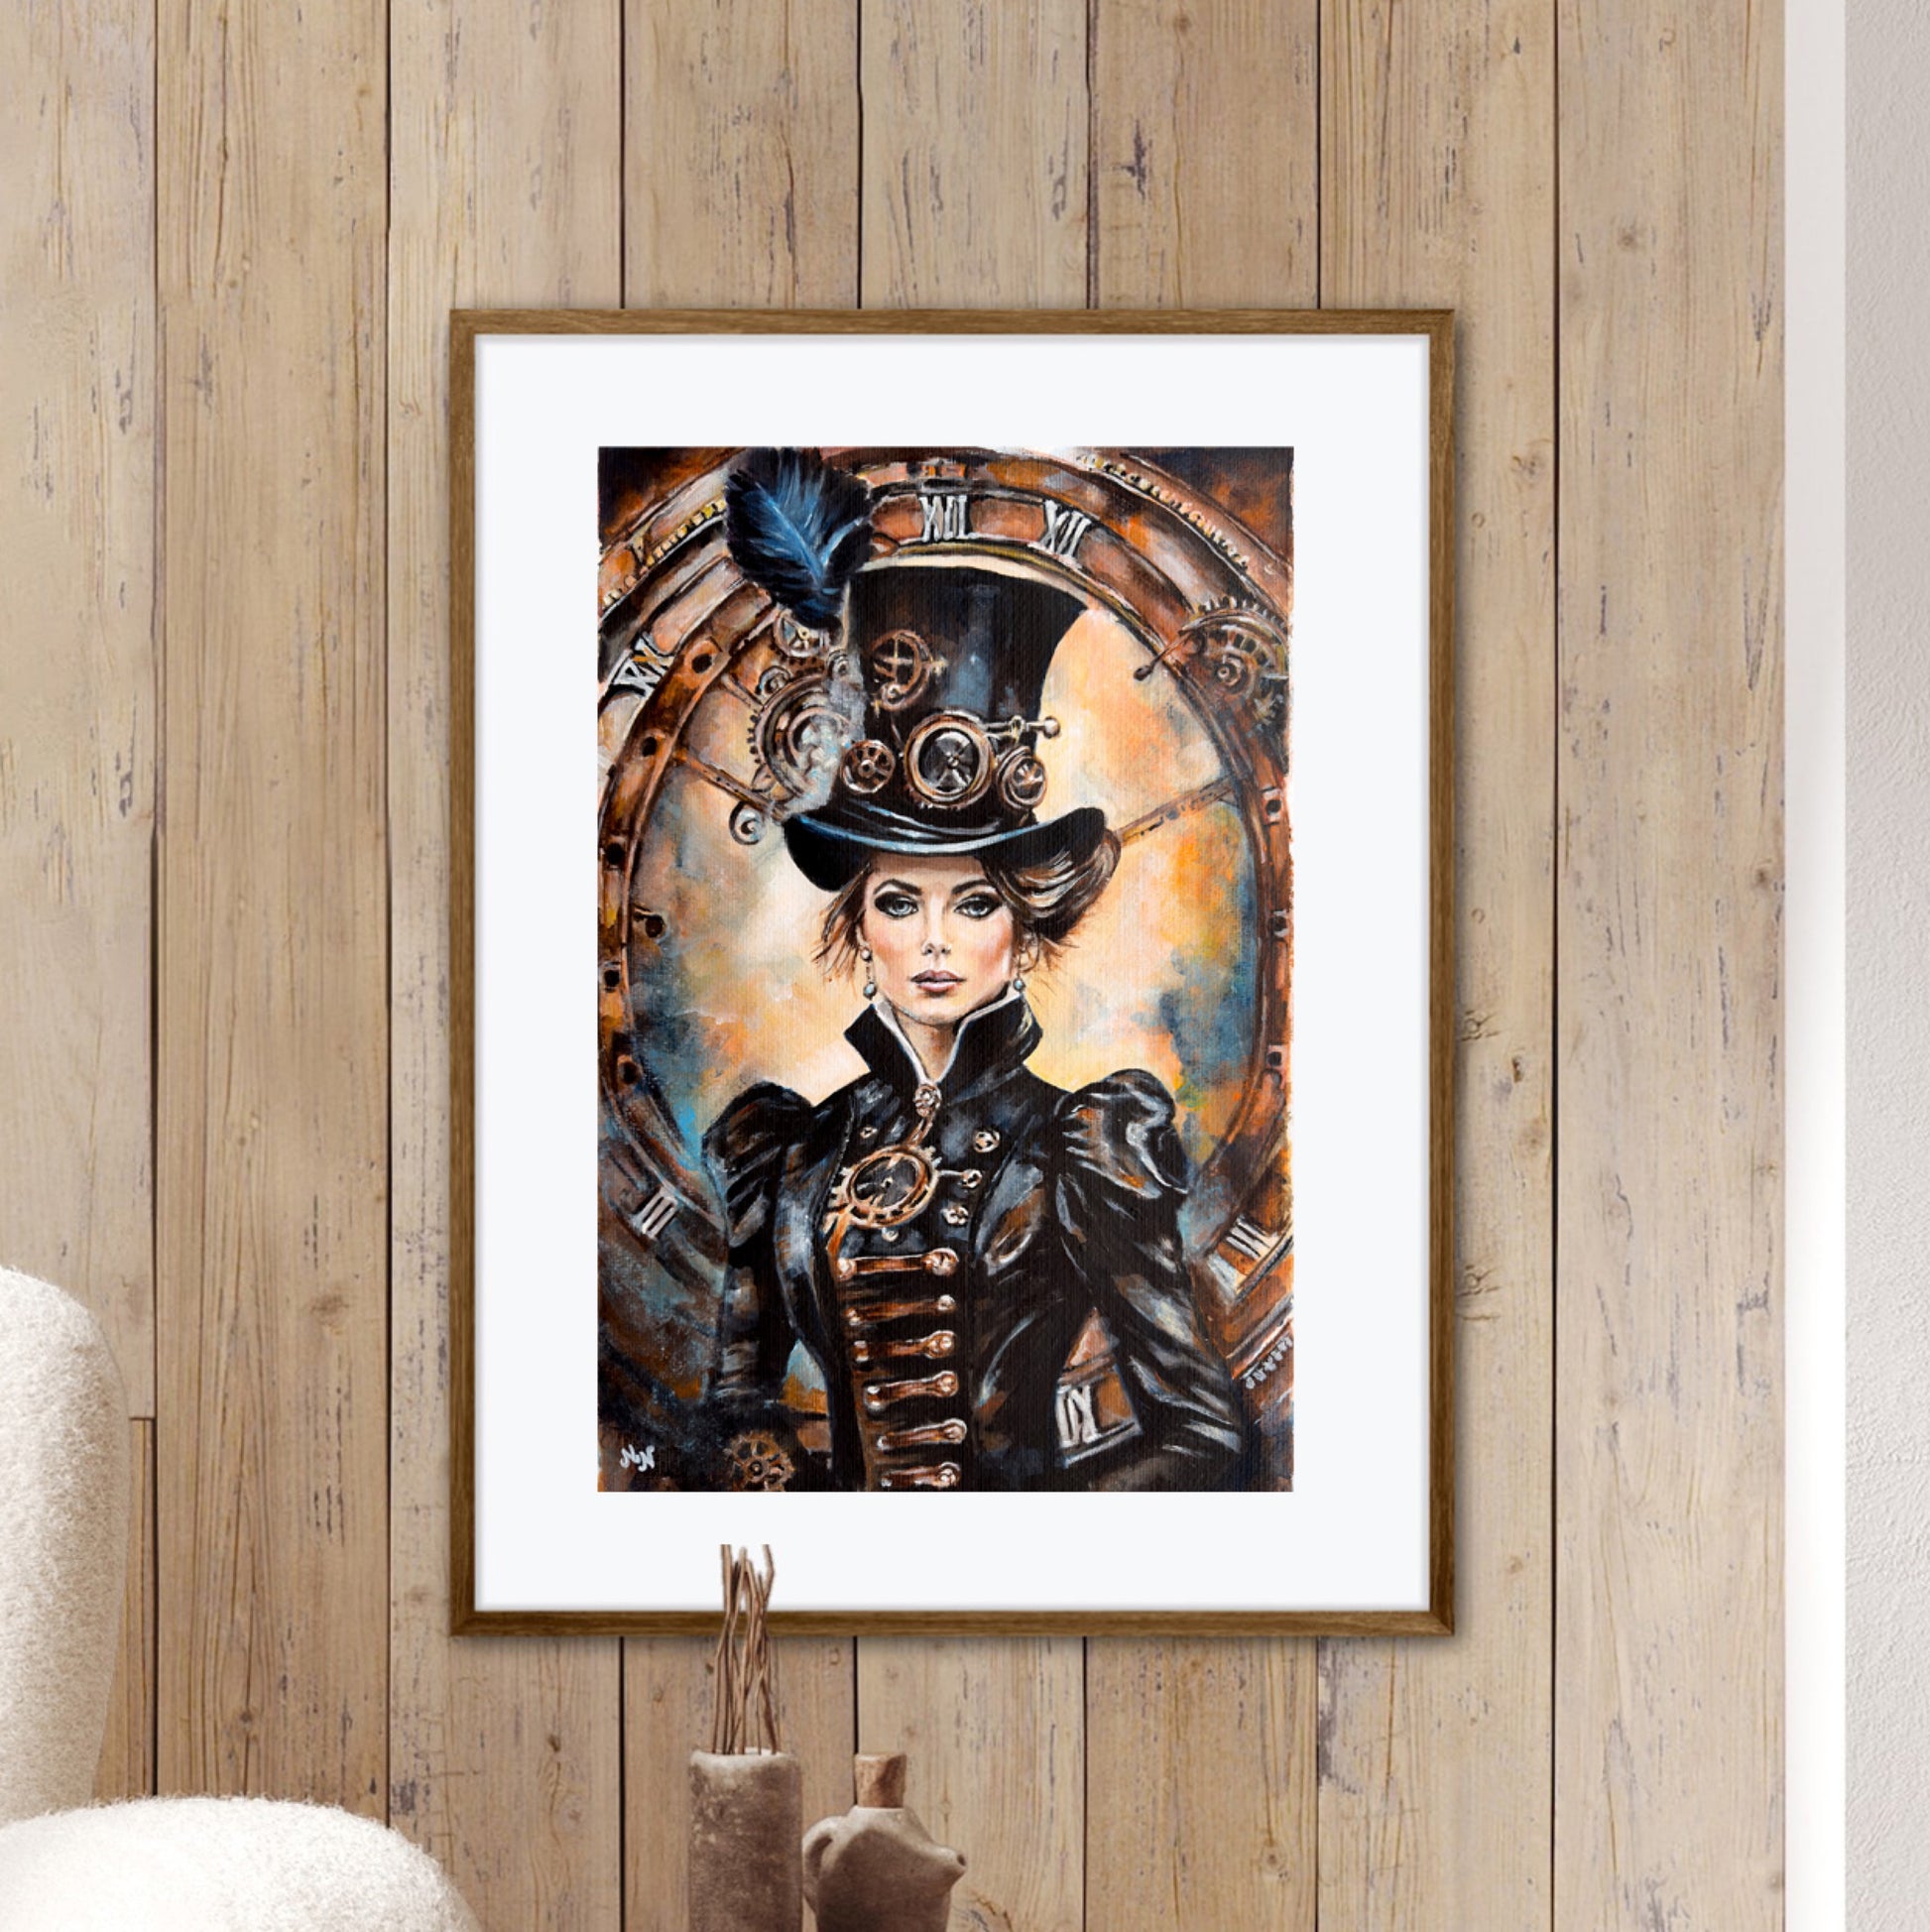 Steampunk Lady: Captivating artwork inspired by the Victorian era and the Industrial Revolution.